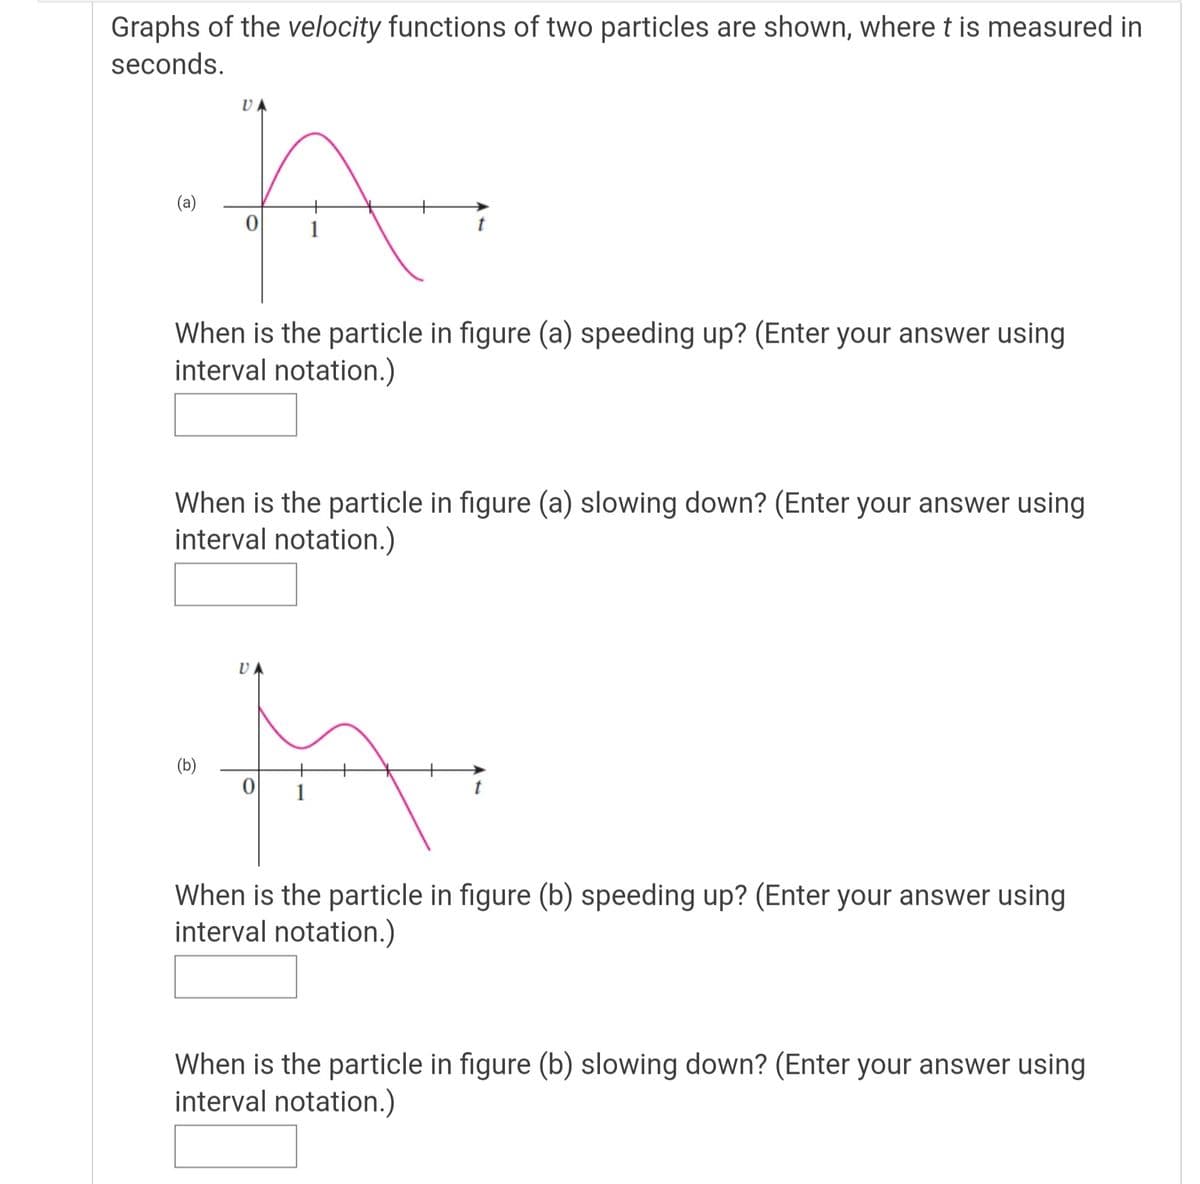 Graphs of the velocity functions of two particles are shown, where t is measured in
seconds.
(a)
1
When is the particle in figure (a) speeding up? (Enter your answer using
interval notation.)
When is the particle in figure (a) slowing down? (Enter your answer using
interval notation.)
(b)
+
1
When is the particle in figure (b) speeding up? (Enter your answer using
interval notation.)
When is the particle in figure (b) slowing down? (Enter your answer using
interval notation.)
